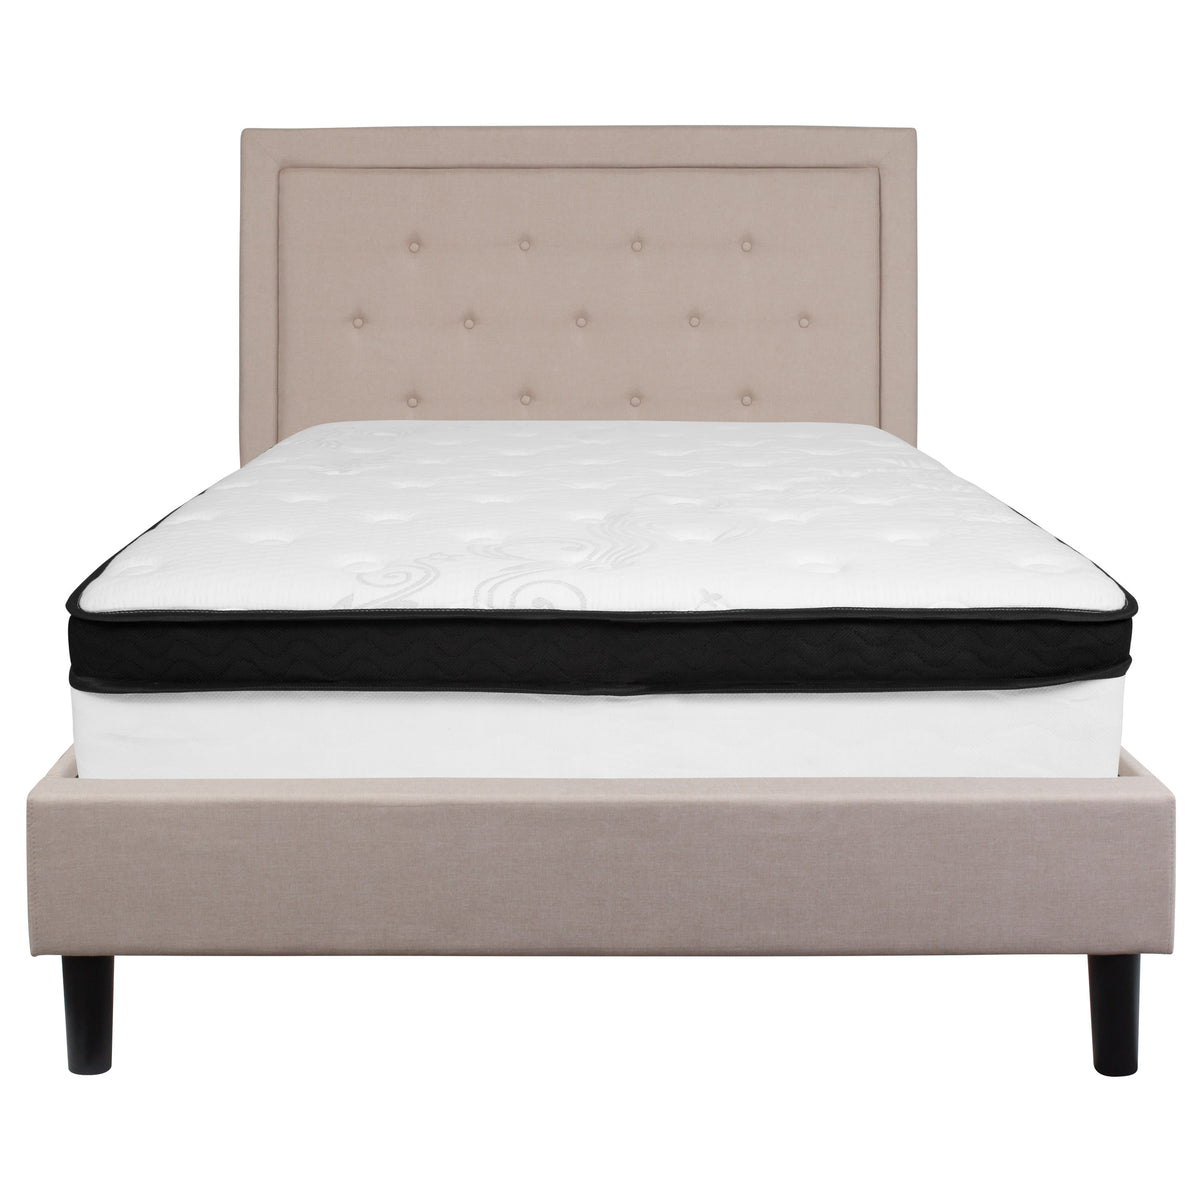 Beige,Full |#| Full Size Panel Tufted Beige Fabric Platform Bed with Memory Foam Mattress